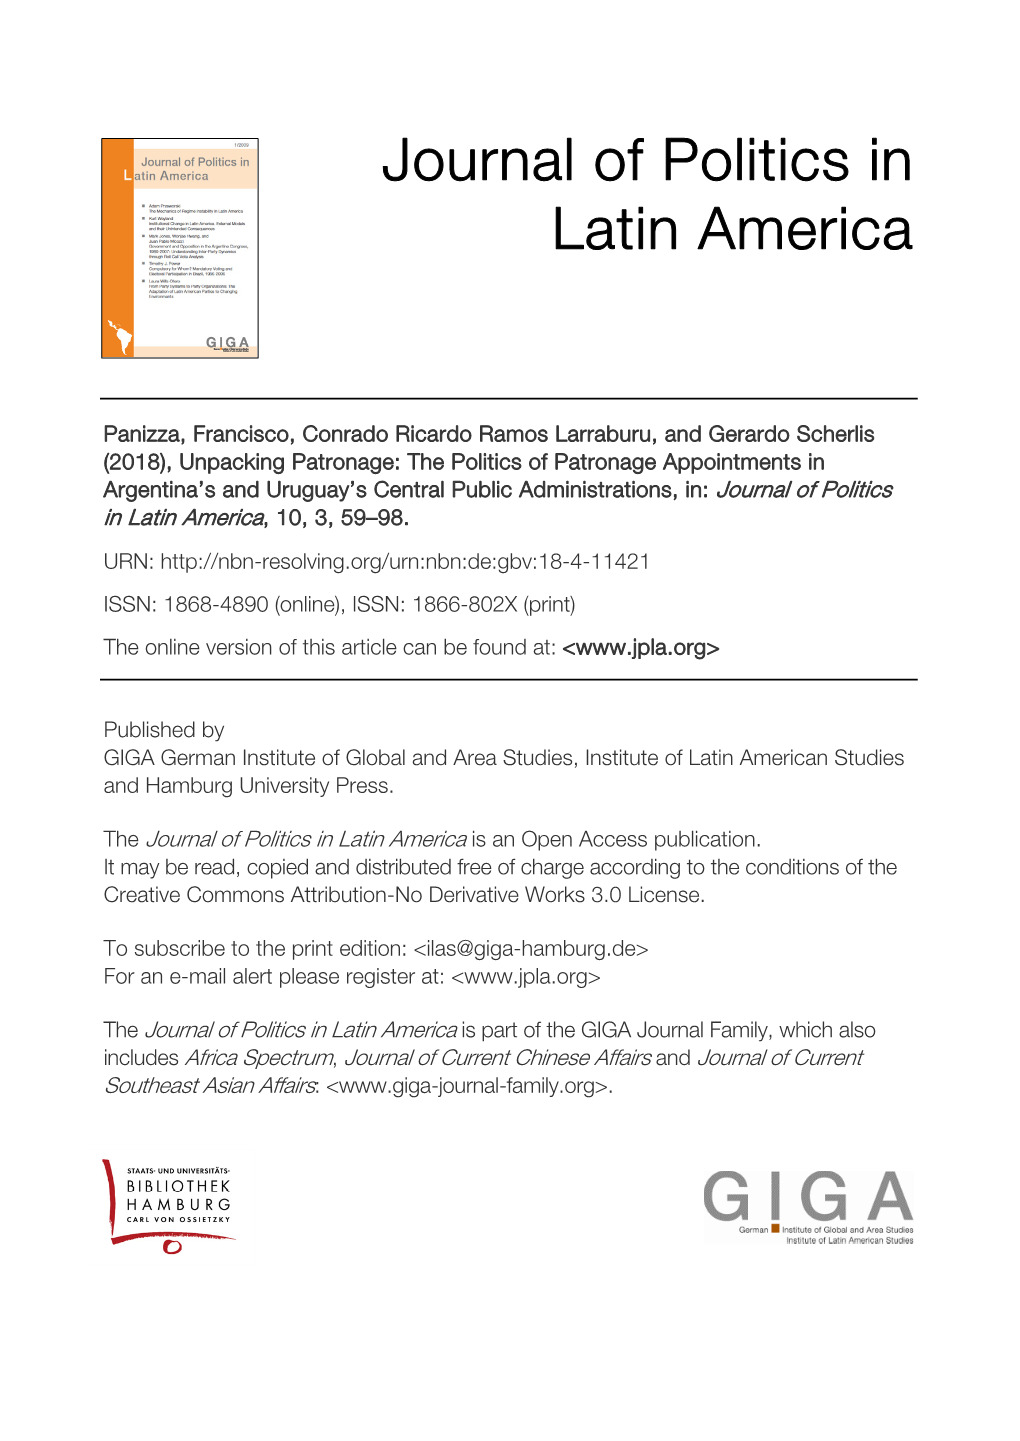 Unpacking Patronage: the Politics of Patronage Appointments in Argentina's and Uruguay's Central Public Administrations